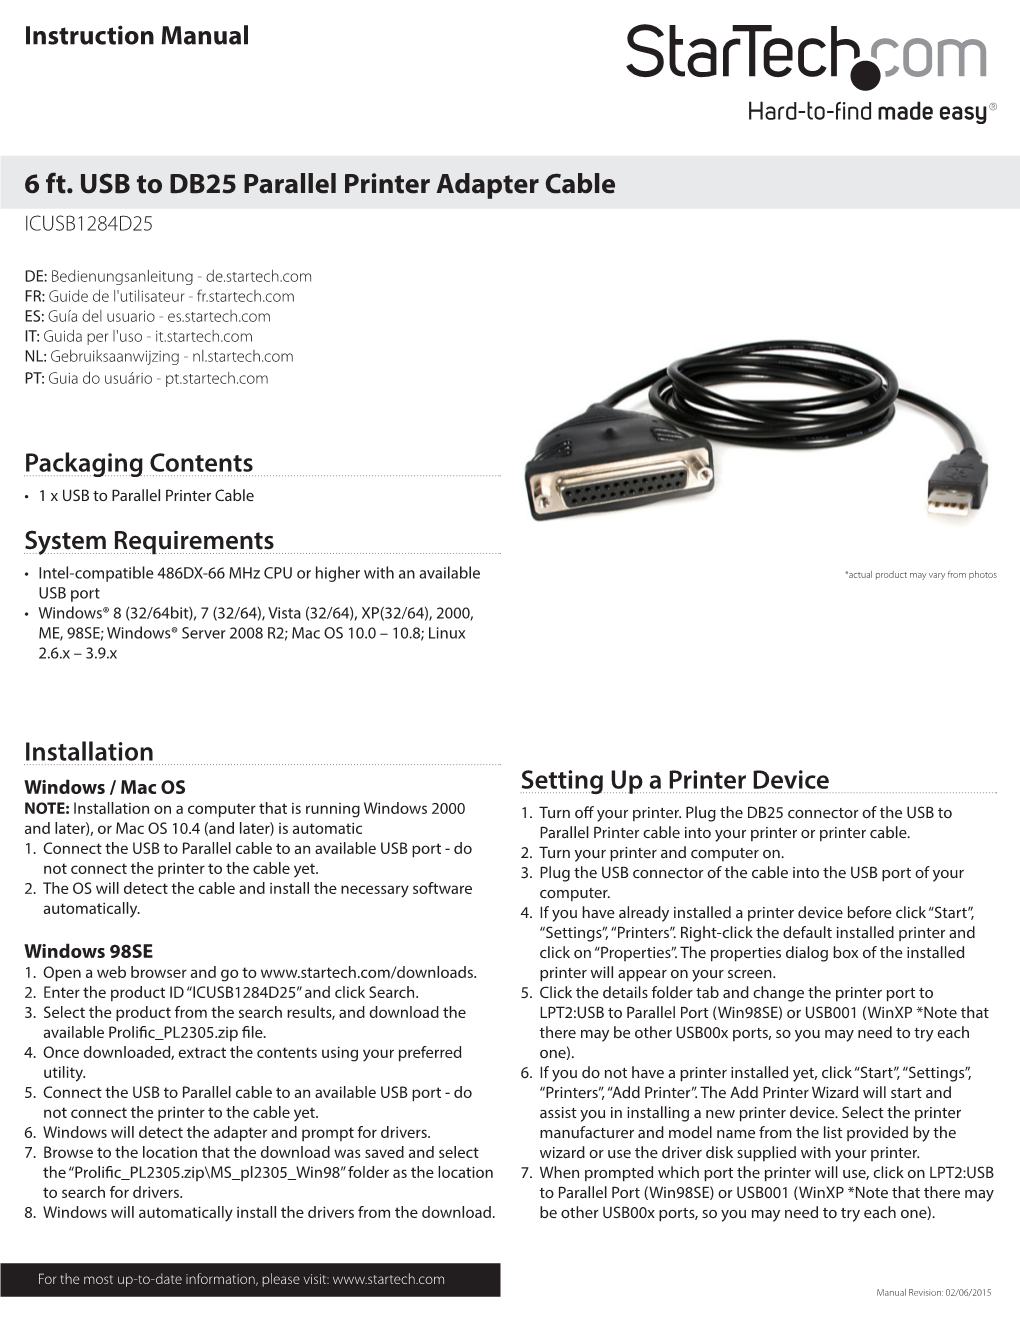 6 Ft. USB to DB25 Parallel Printer Adapter Cable ICUSB1284D25